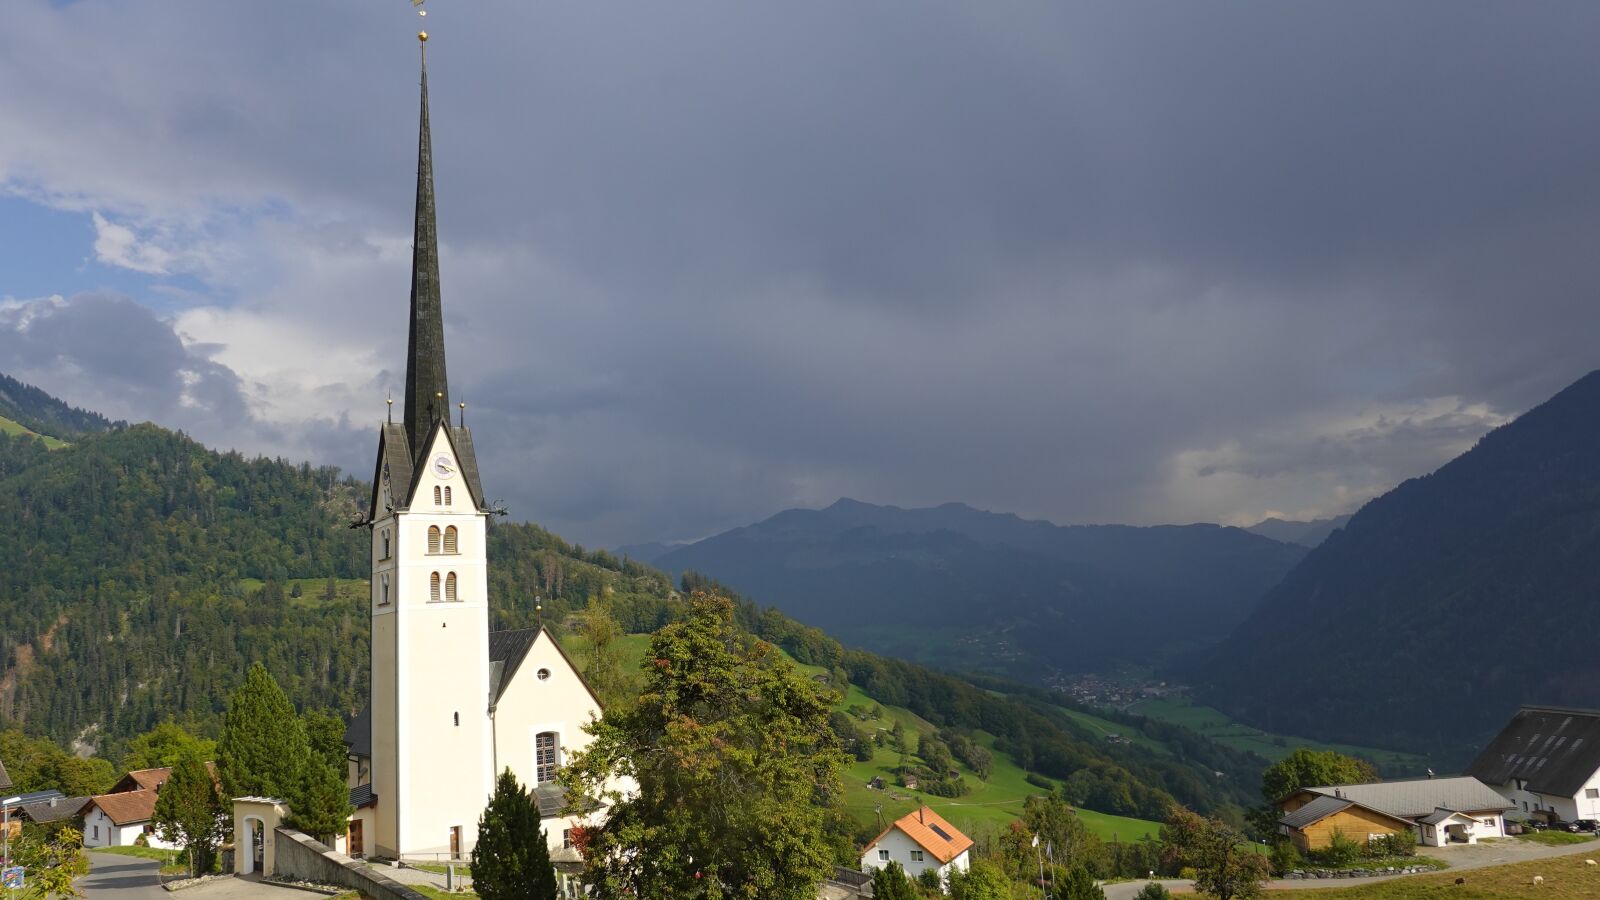 Sony DSC-RX100M7 sample photo. Church, mountain landscape, seewis photography